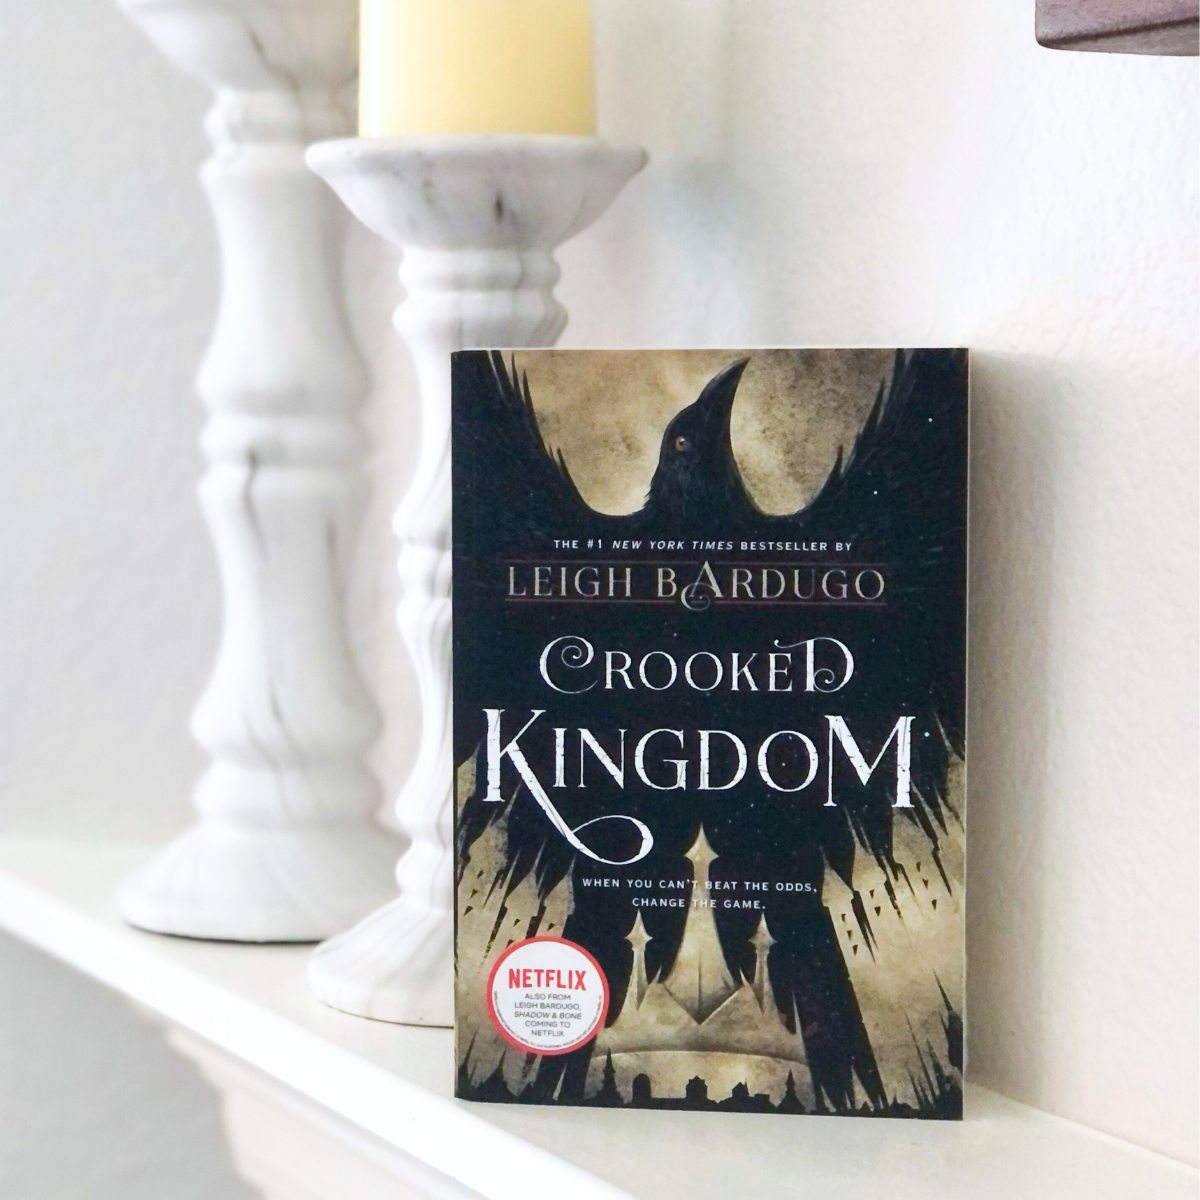 Crooked Kingdom paperback book on a white fireplace mantle with candles